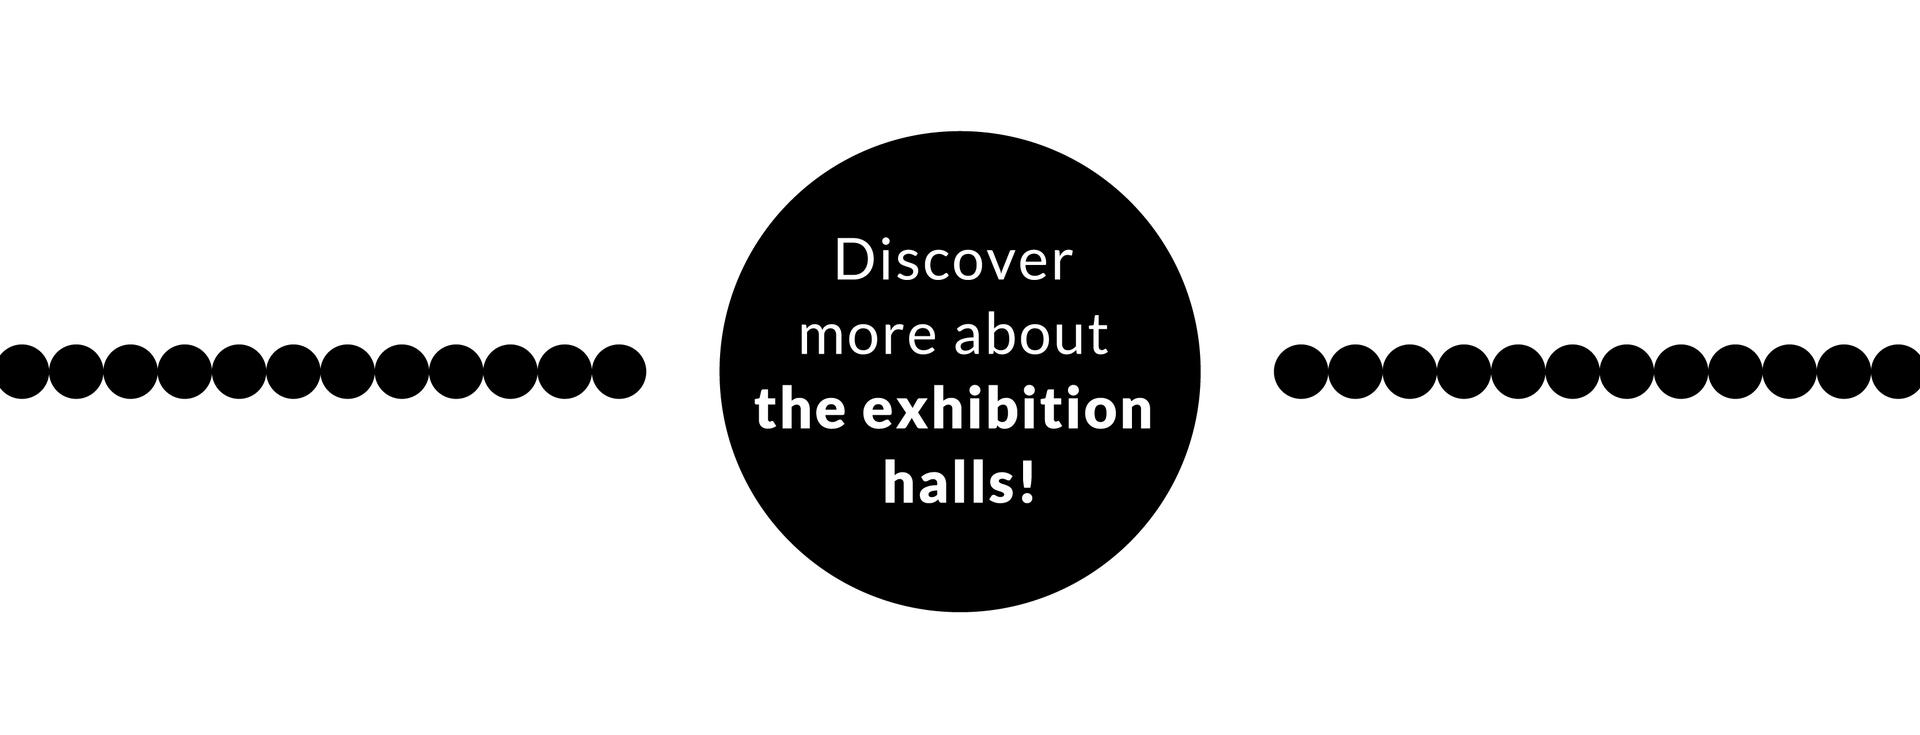 Discover more about the exhibition halls!